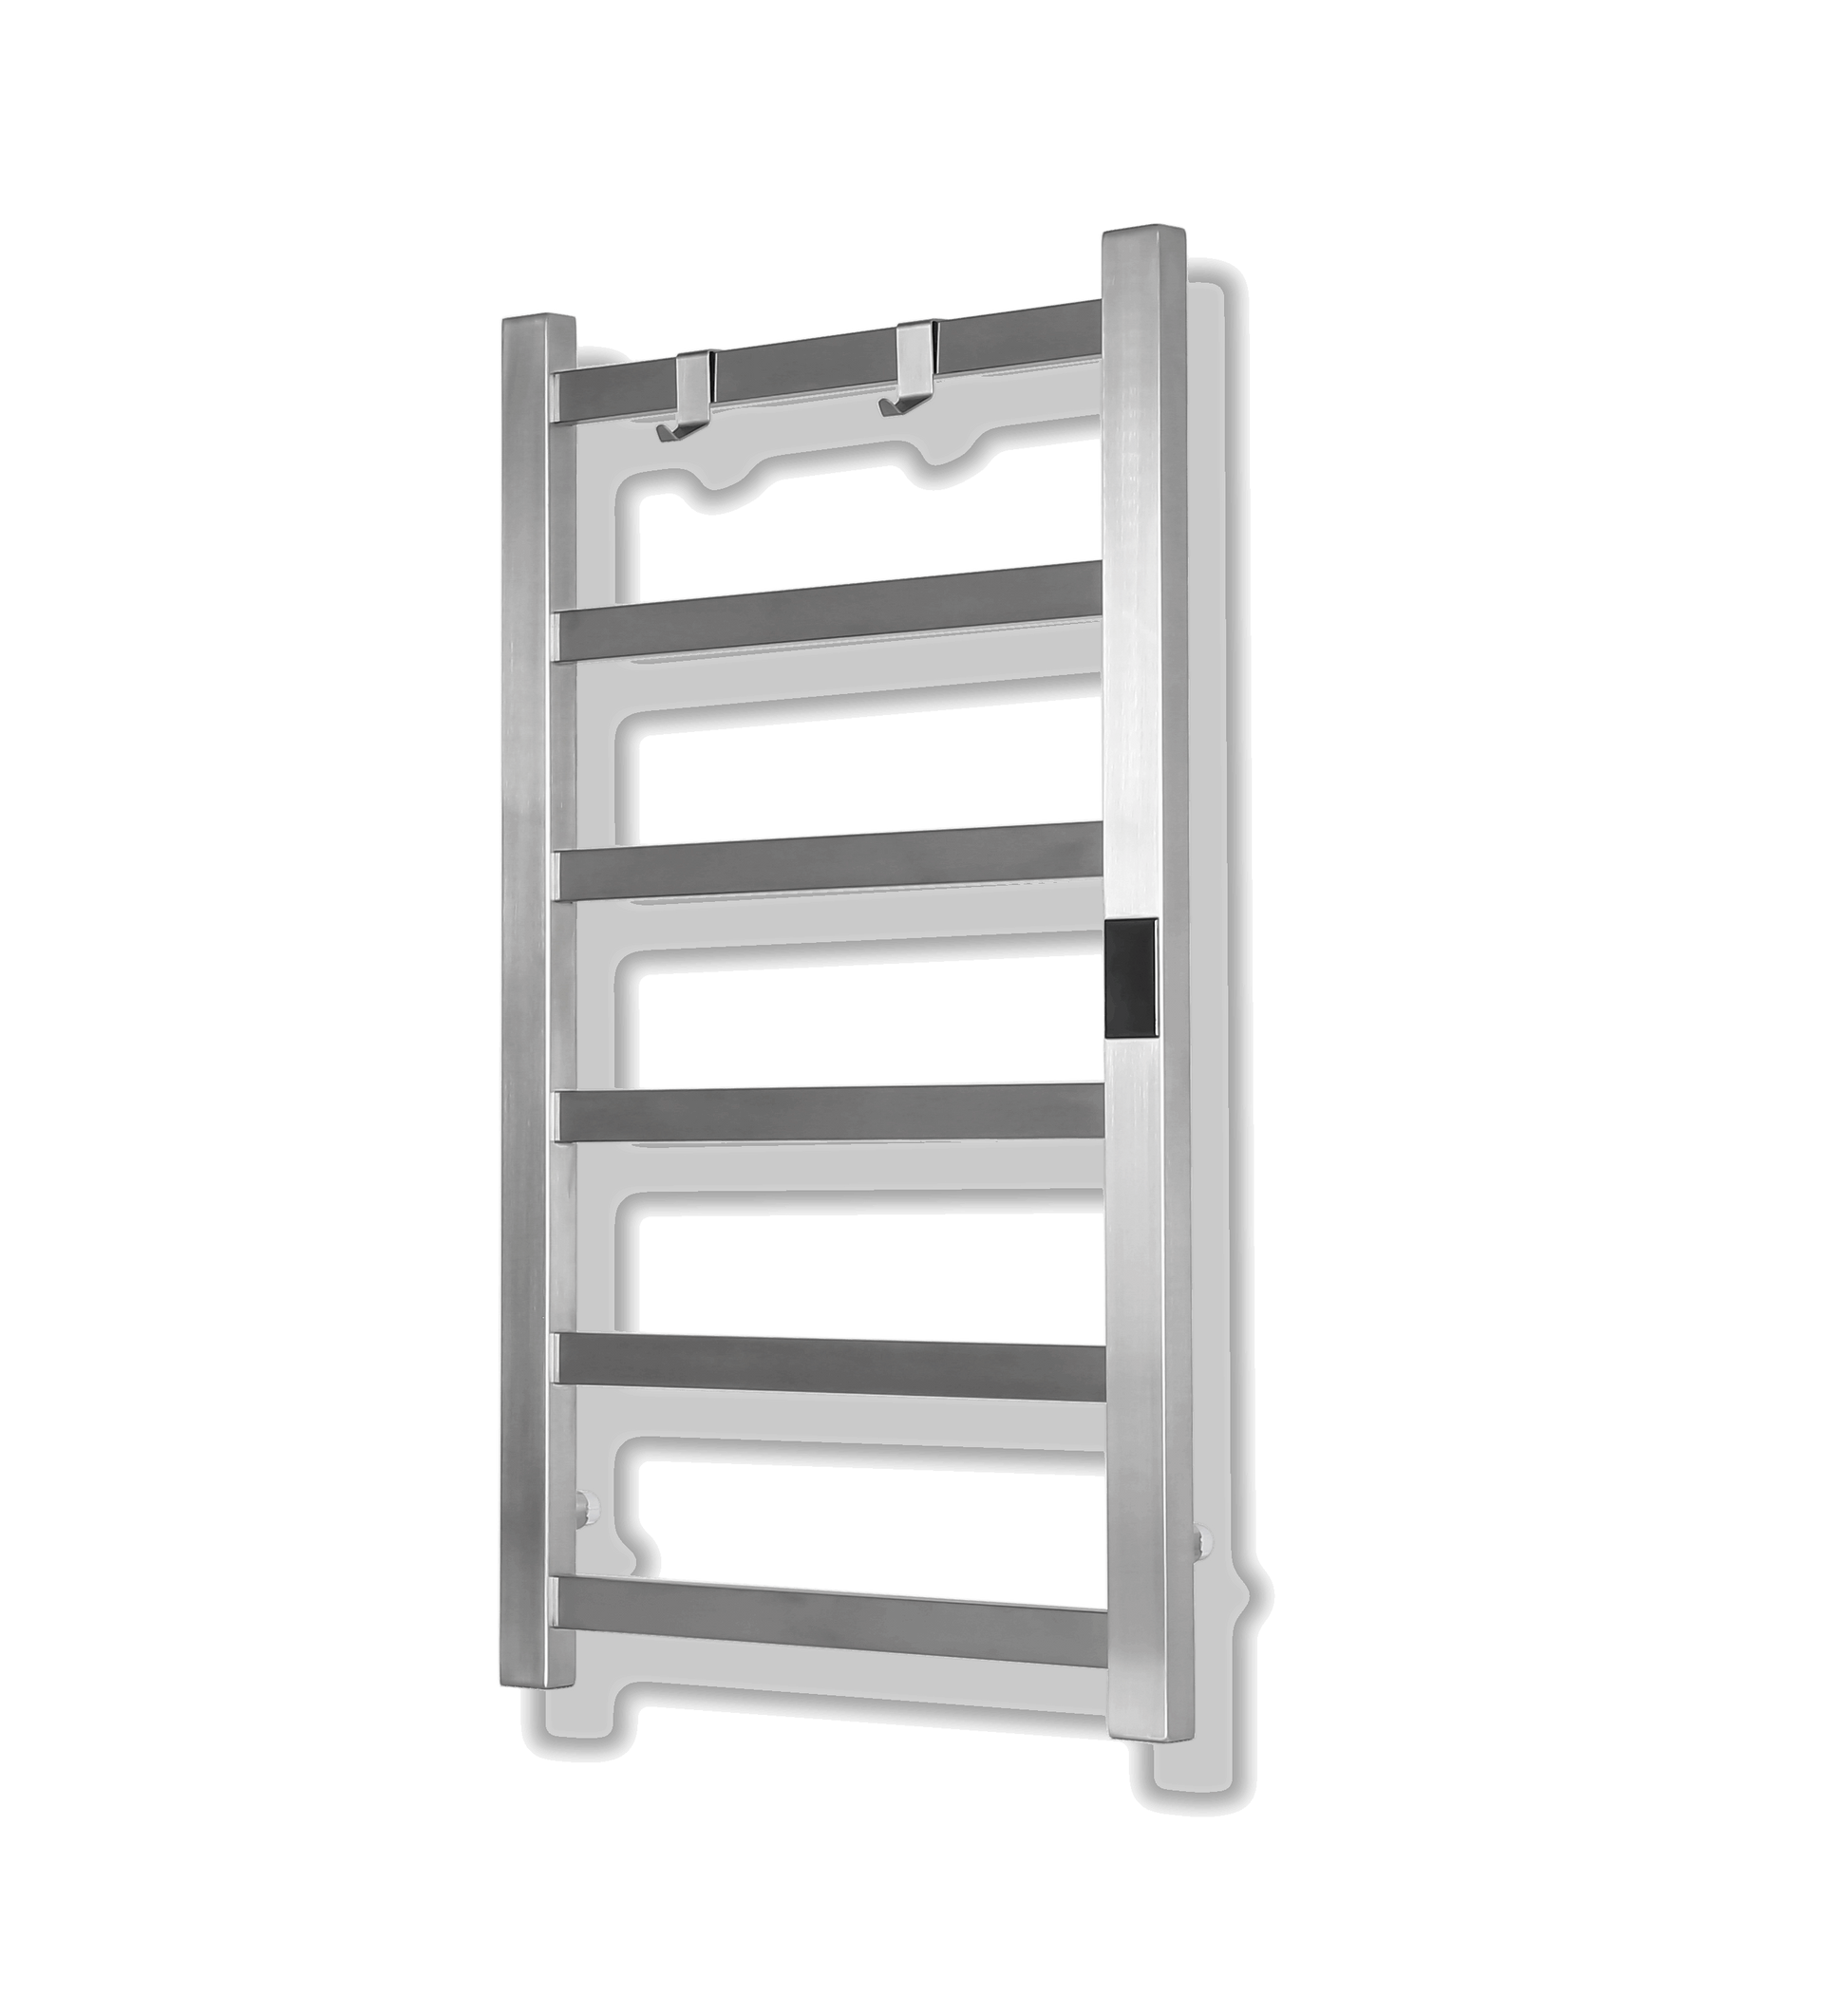 Brushed Stainless Steel 6-Bar Towel Warmer by Topdattion